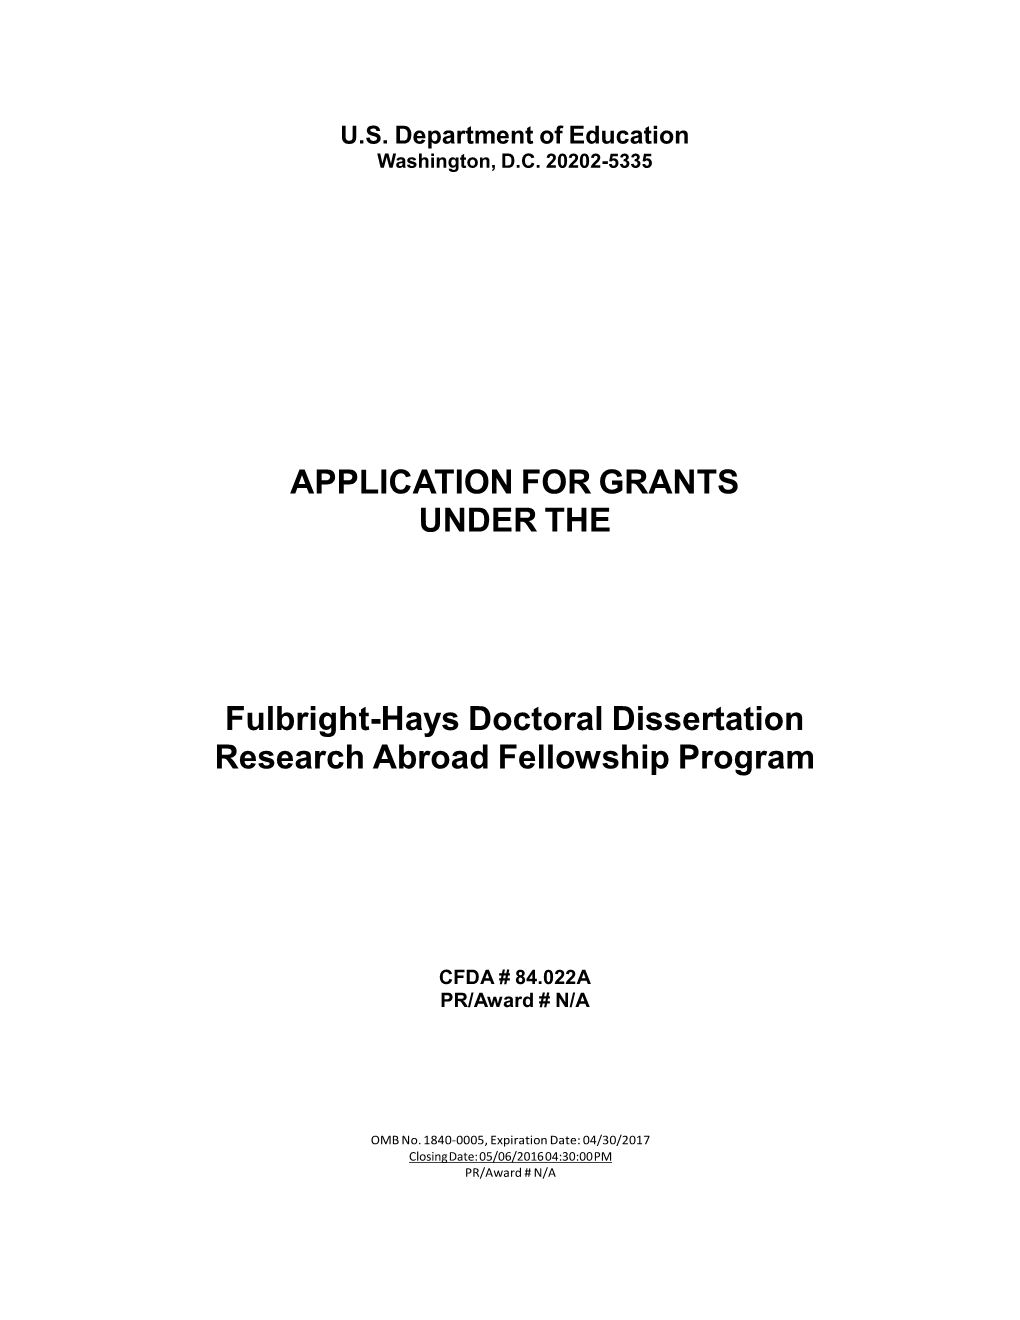 FY 2016 Grant Application Instructions for the Fulbright-Hays Doctoral